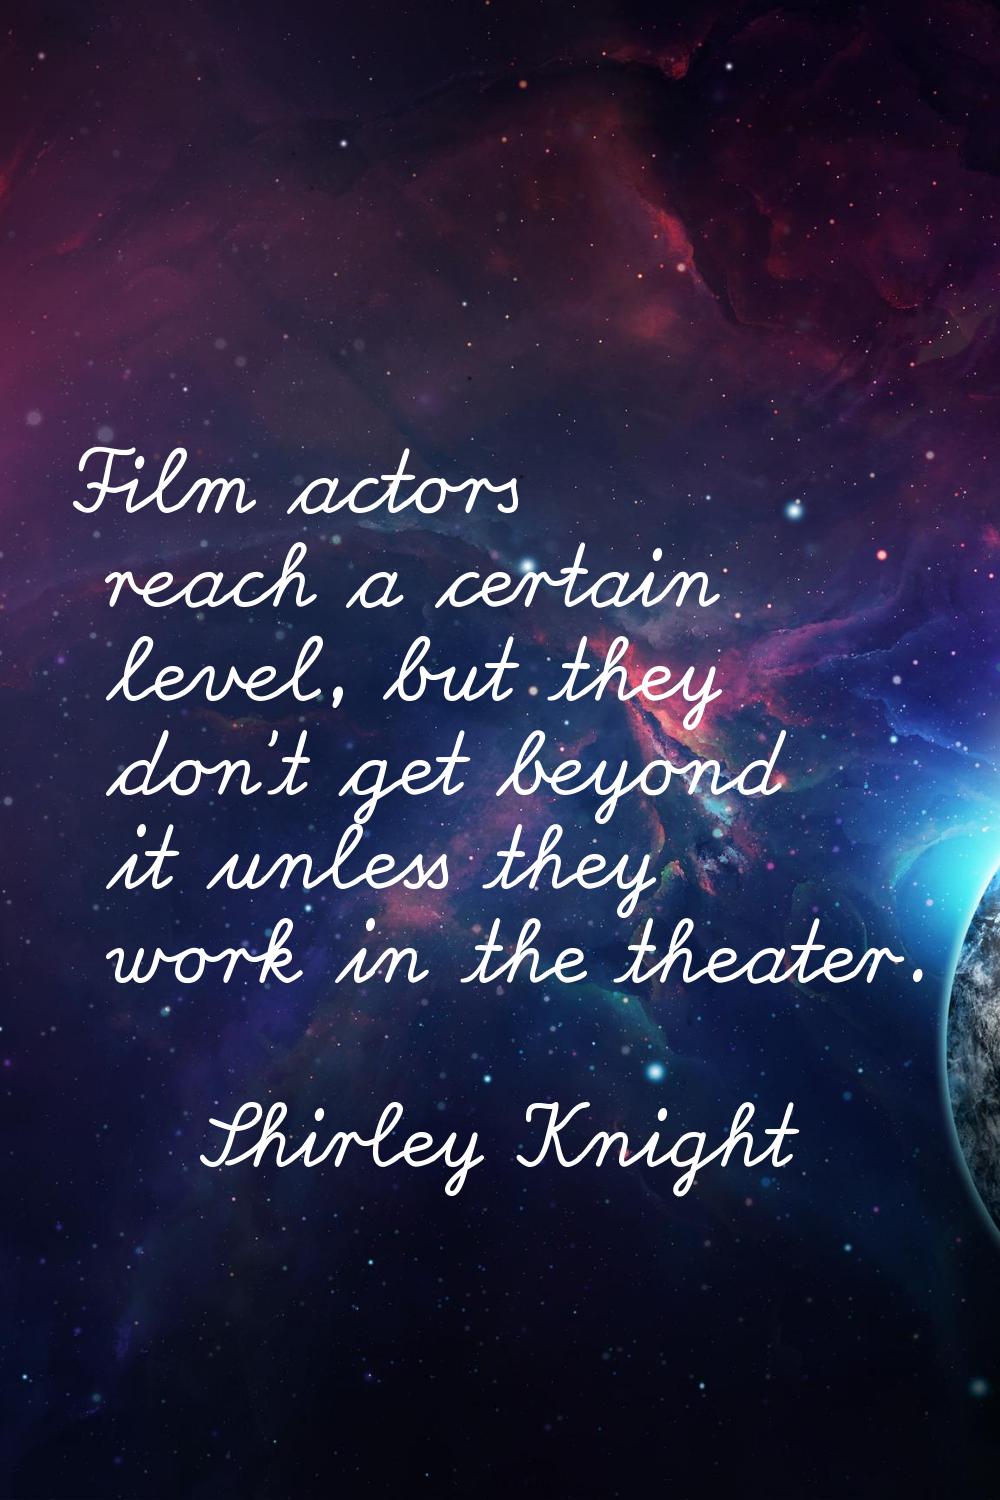 Film actors reach a certain level, but they don't get beyond it unless they work in the theater.